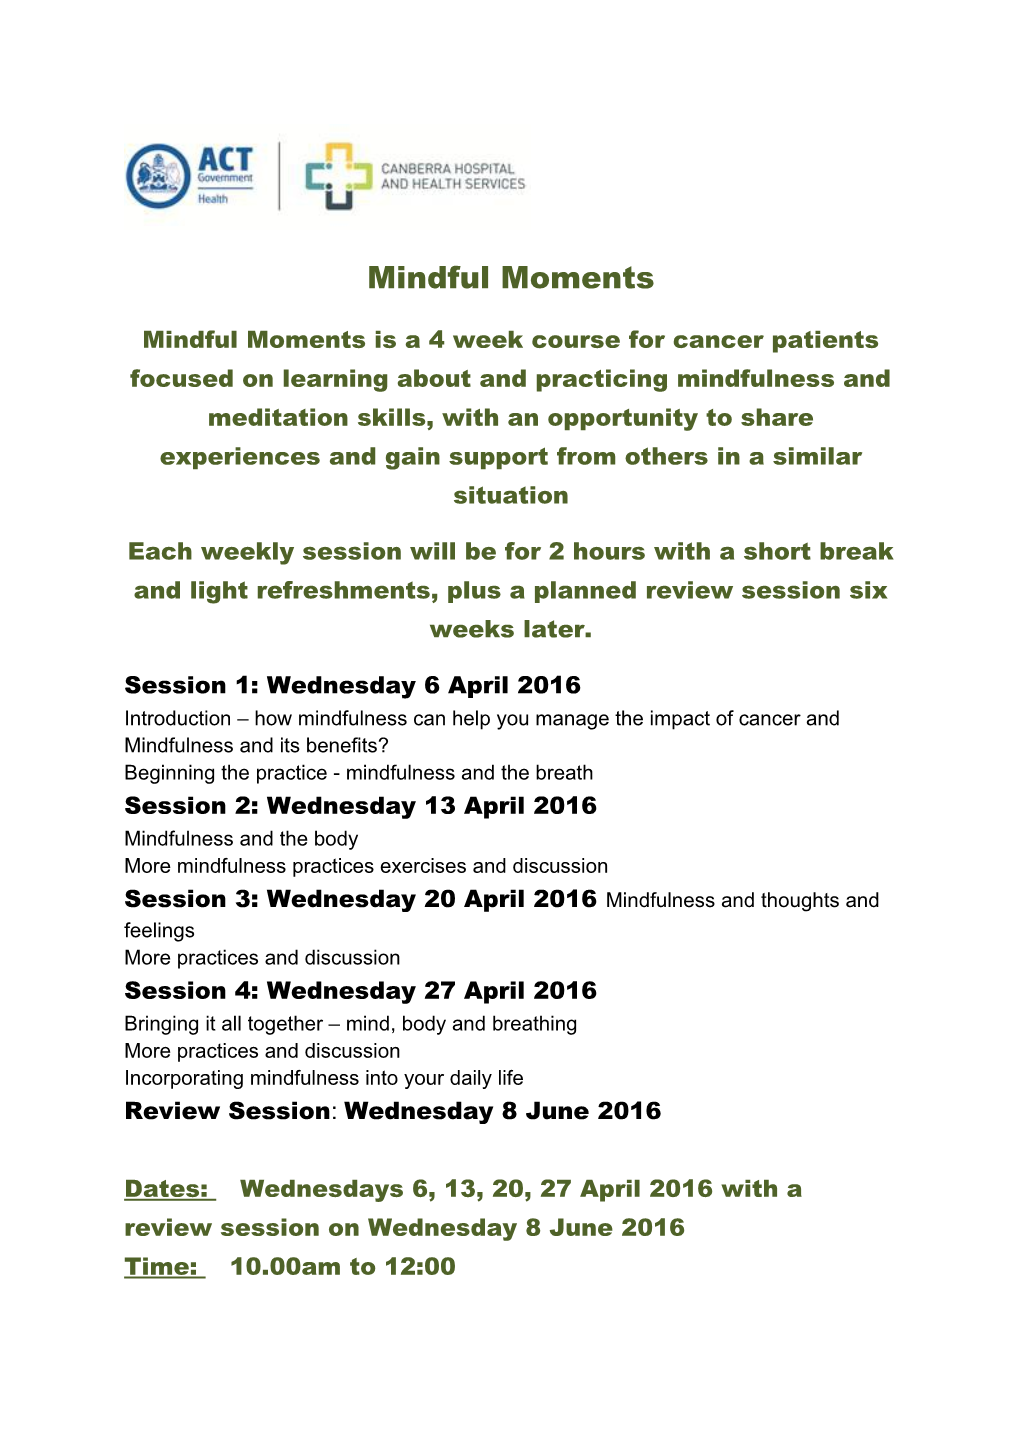 Mindful Moments Is a 4 Week Course for Cancer Patients Focused on Learning About and Practicing